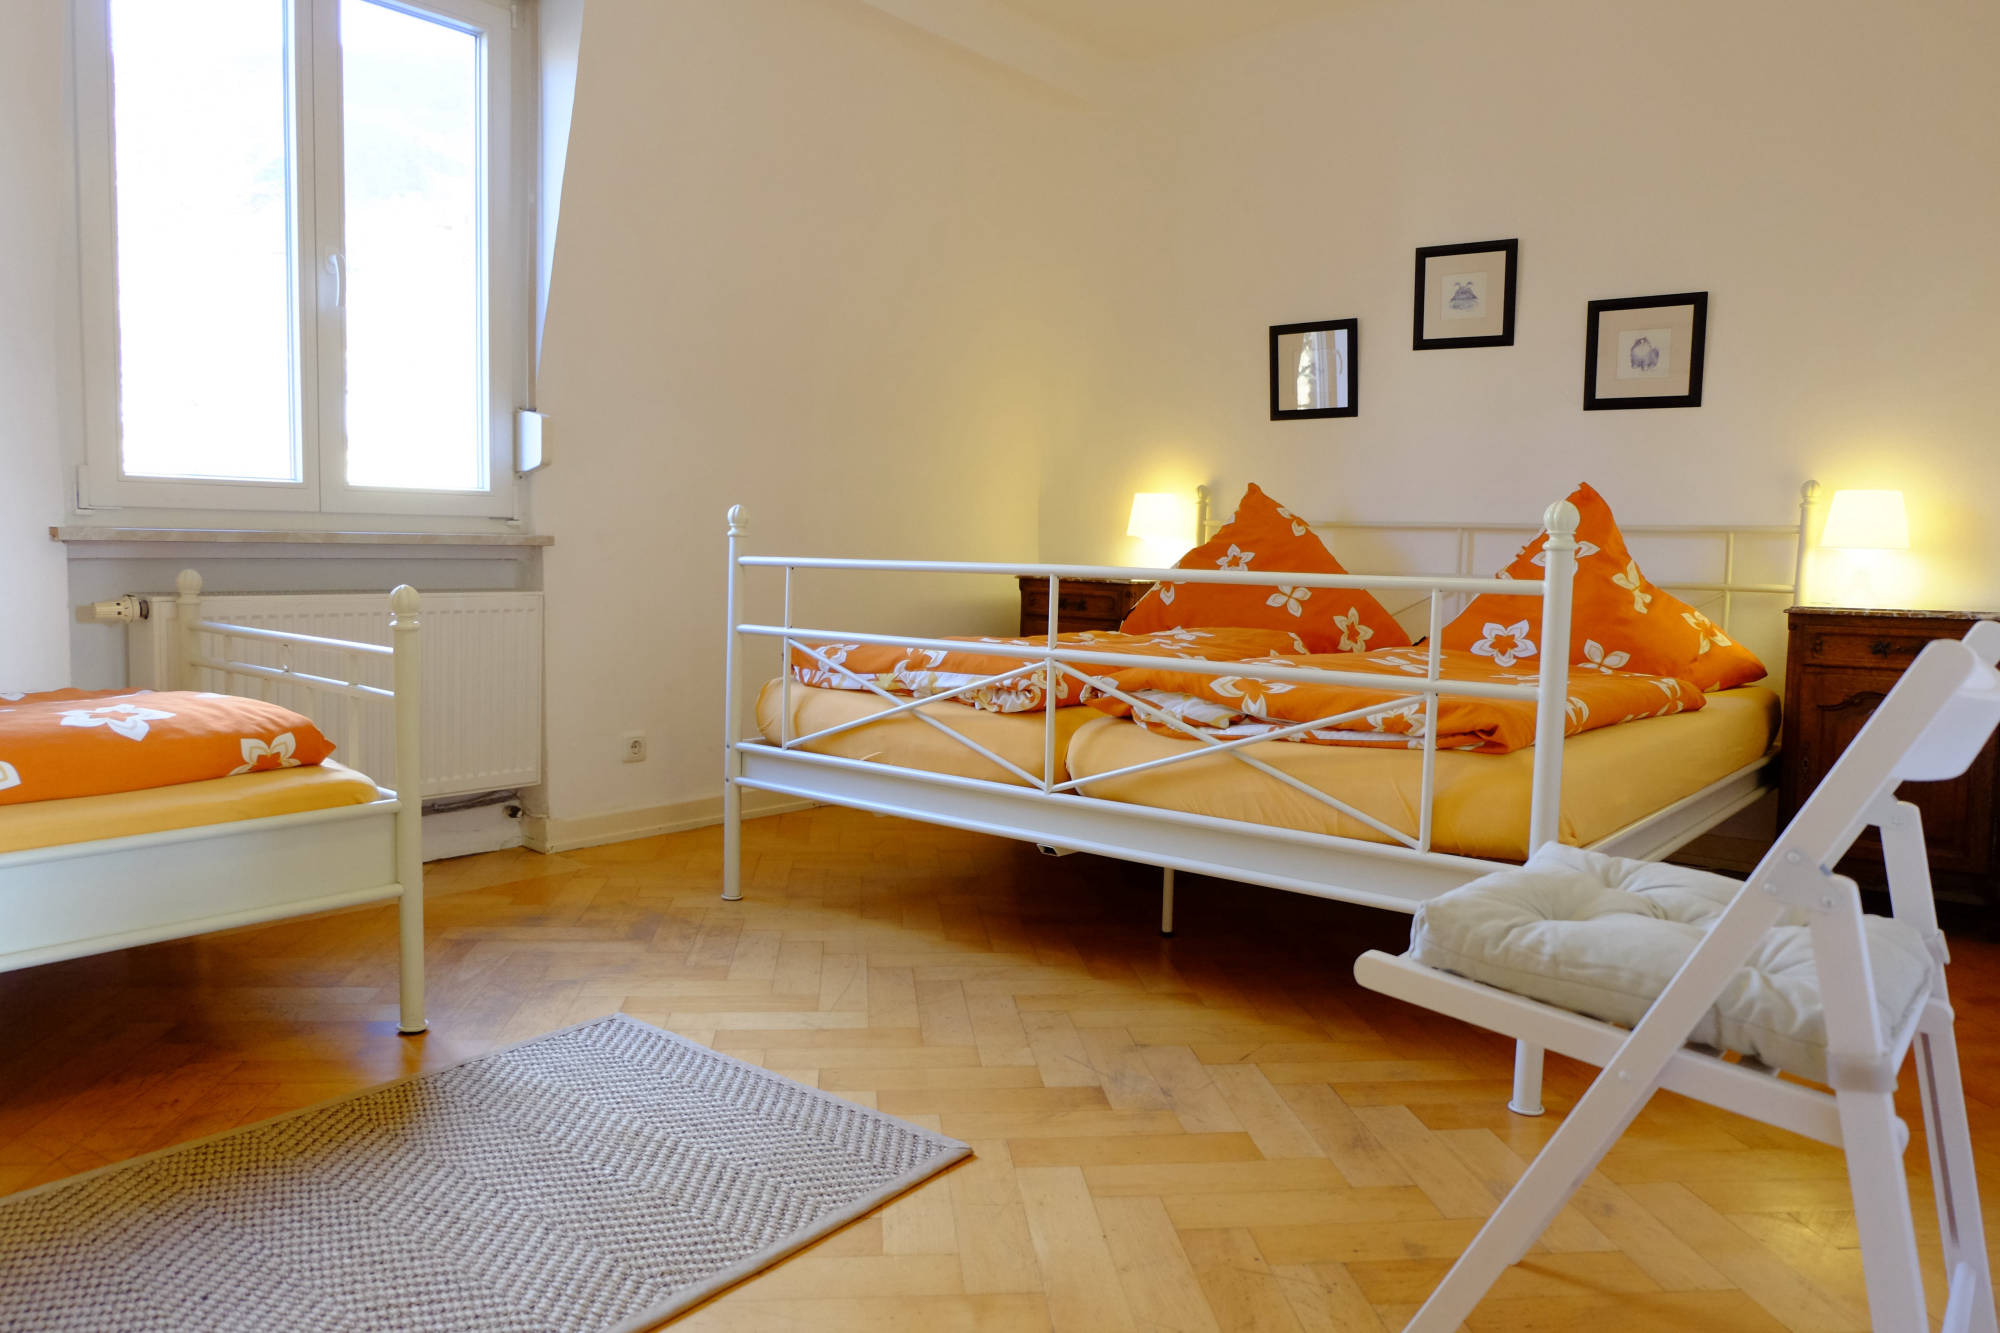 3Room Apartment - Sleeping - 3 beds